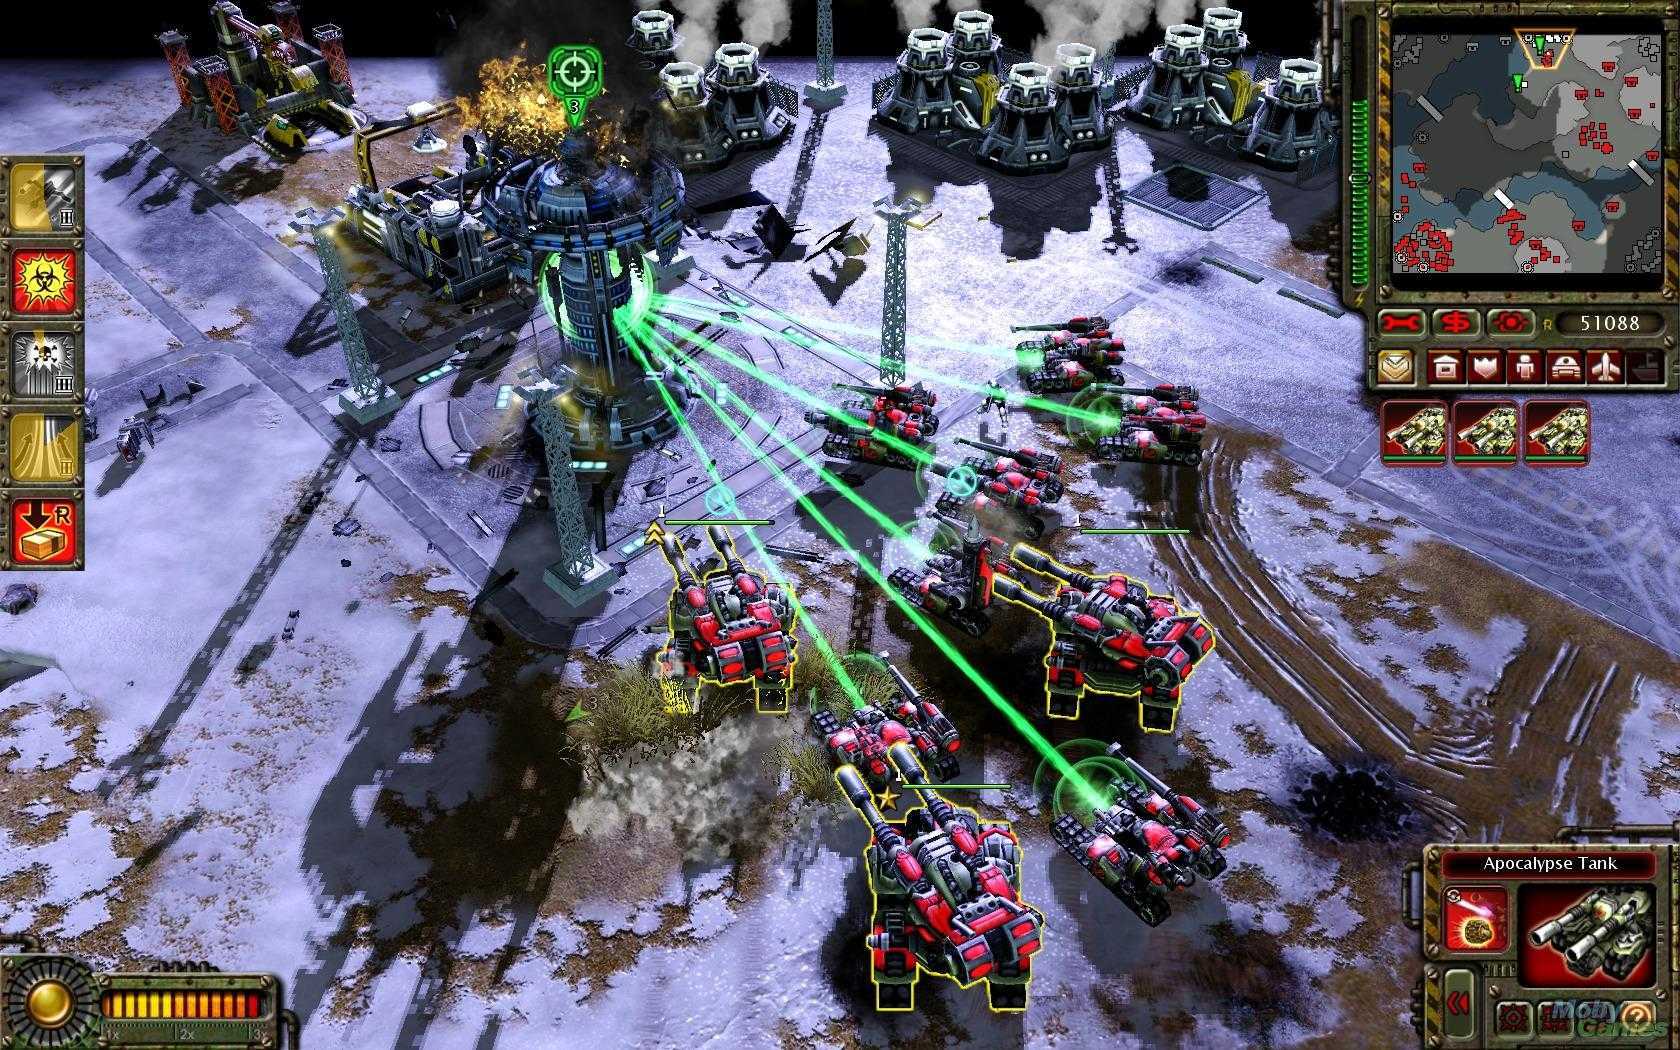 Command & conquer: red alert 3